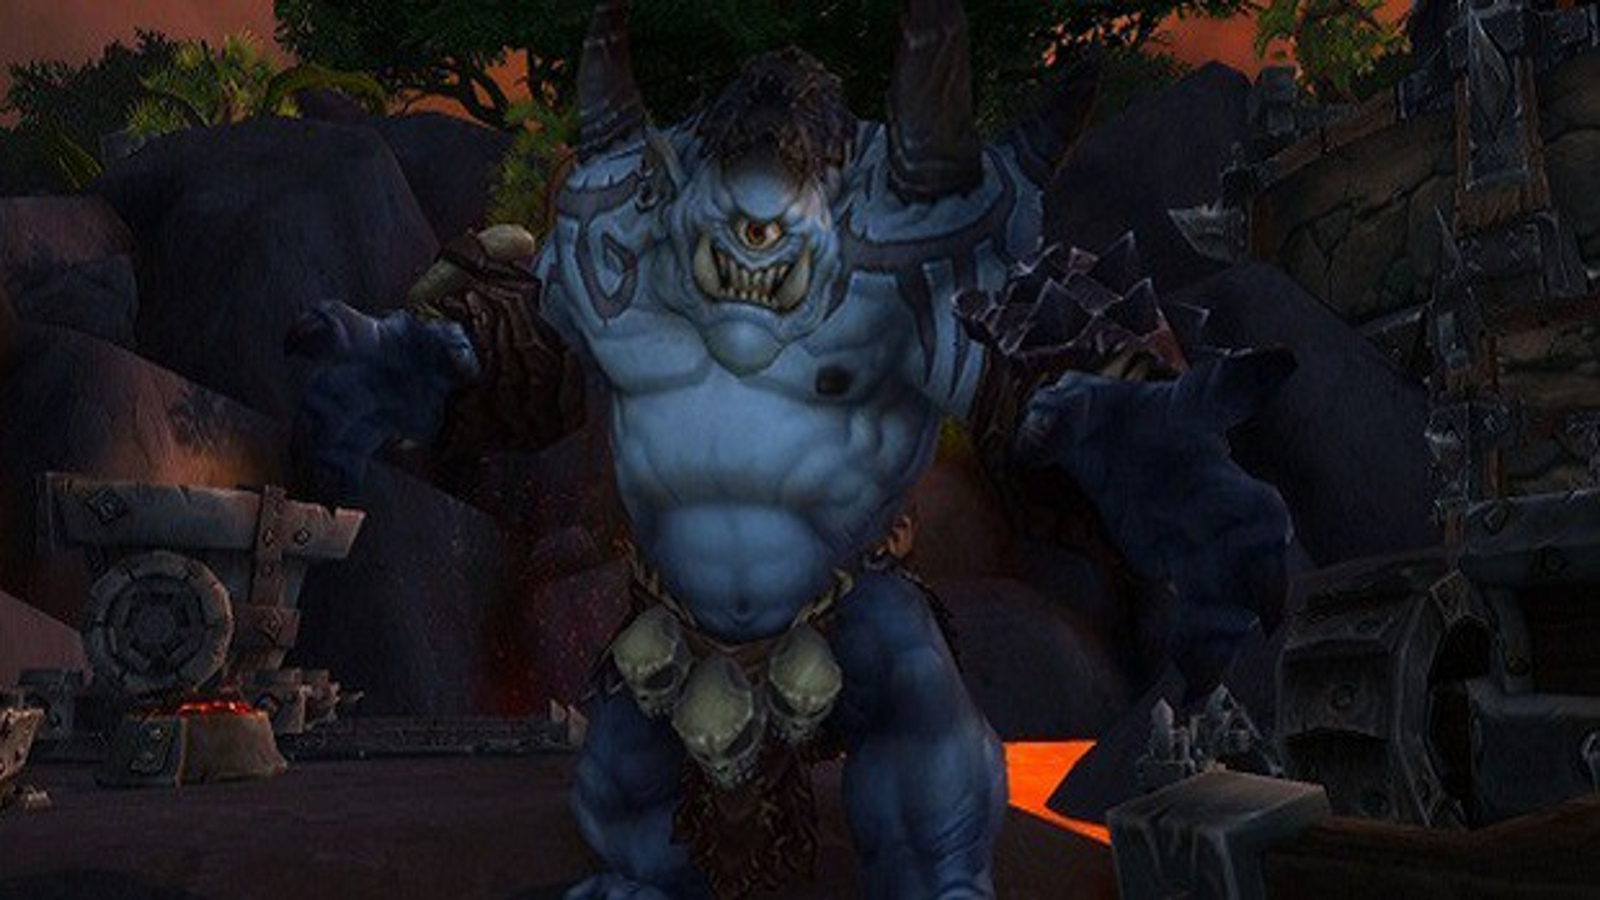 Ever Wanted To Name A World Of Warcraft Server? Here's Your Chance